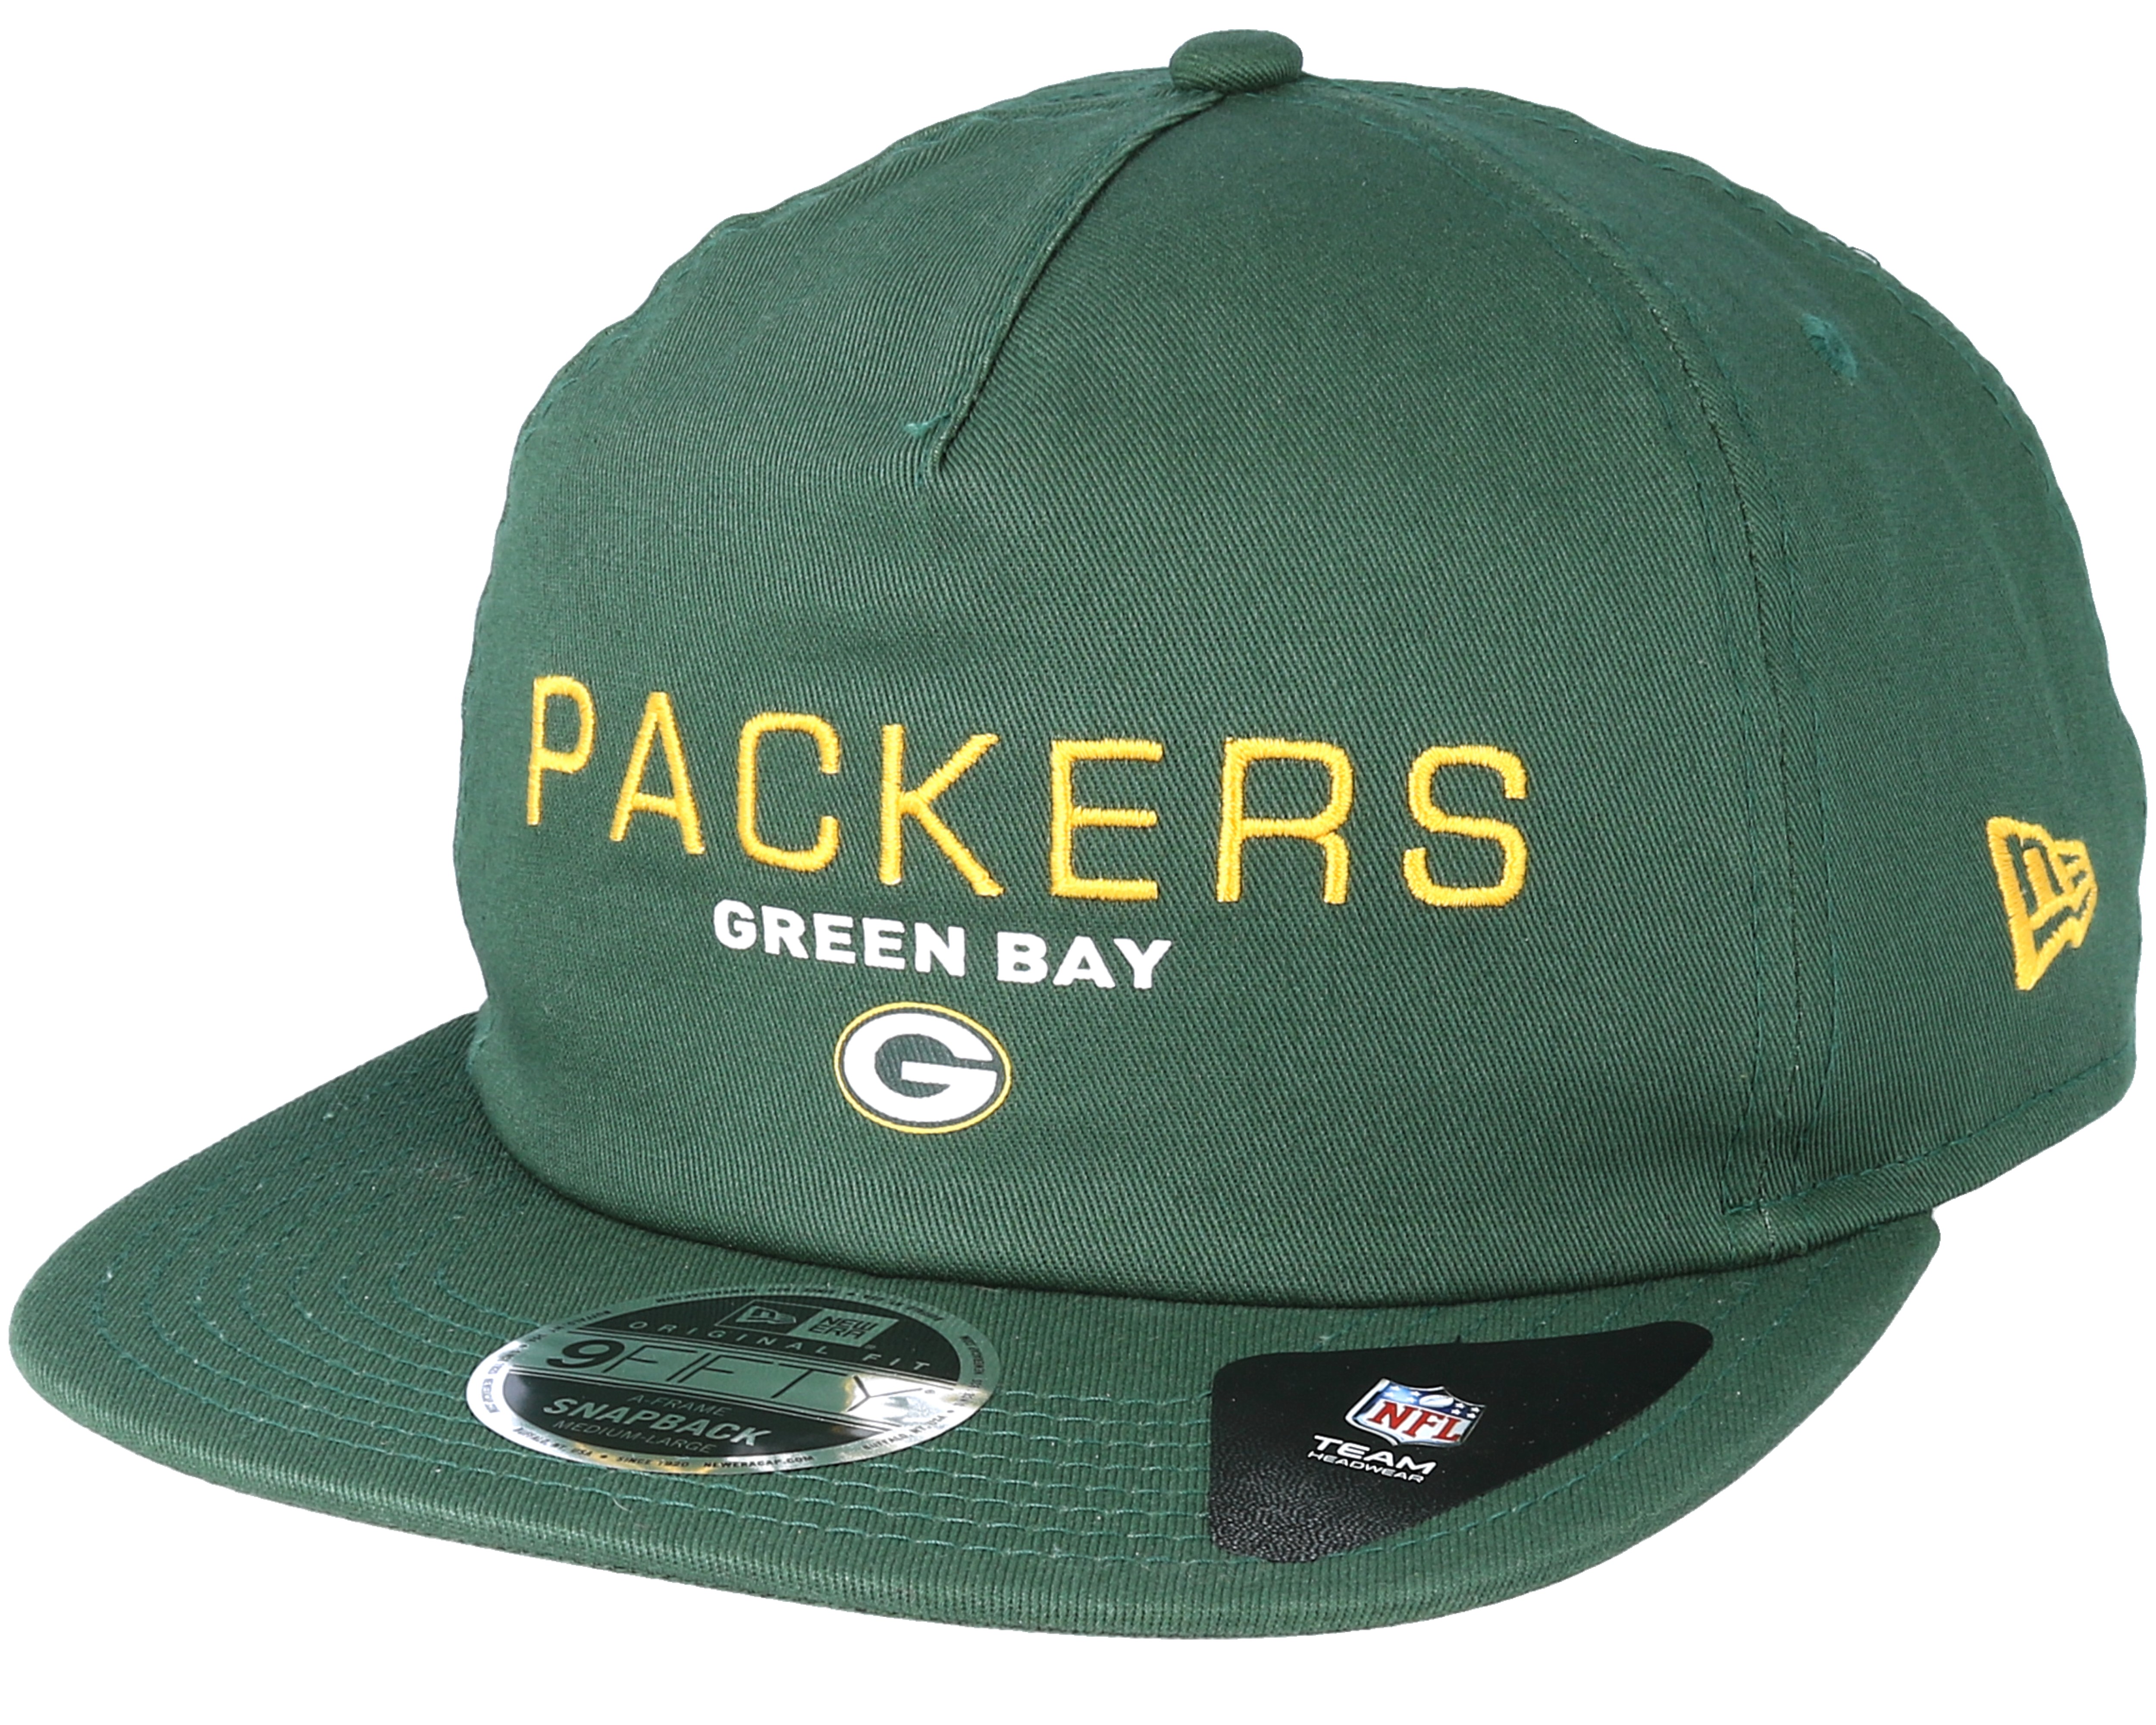 Green Bay Packers Statement 9Fifty Green Snapback - New Era caps ...